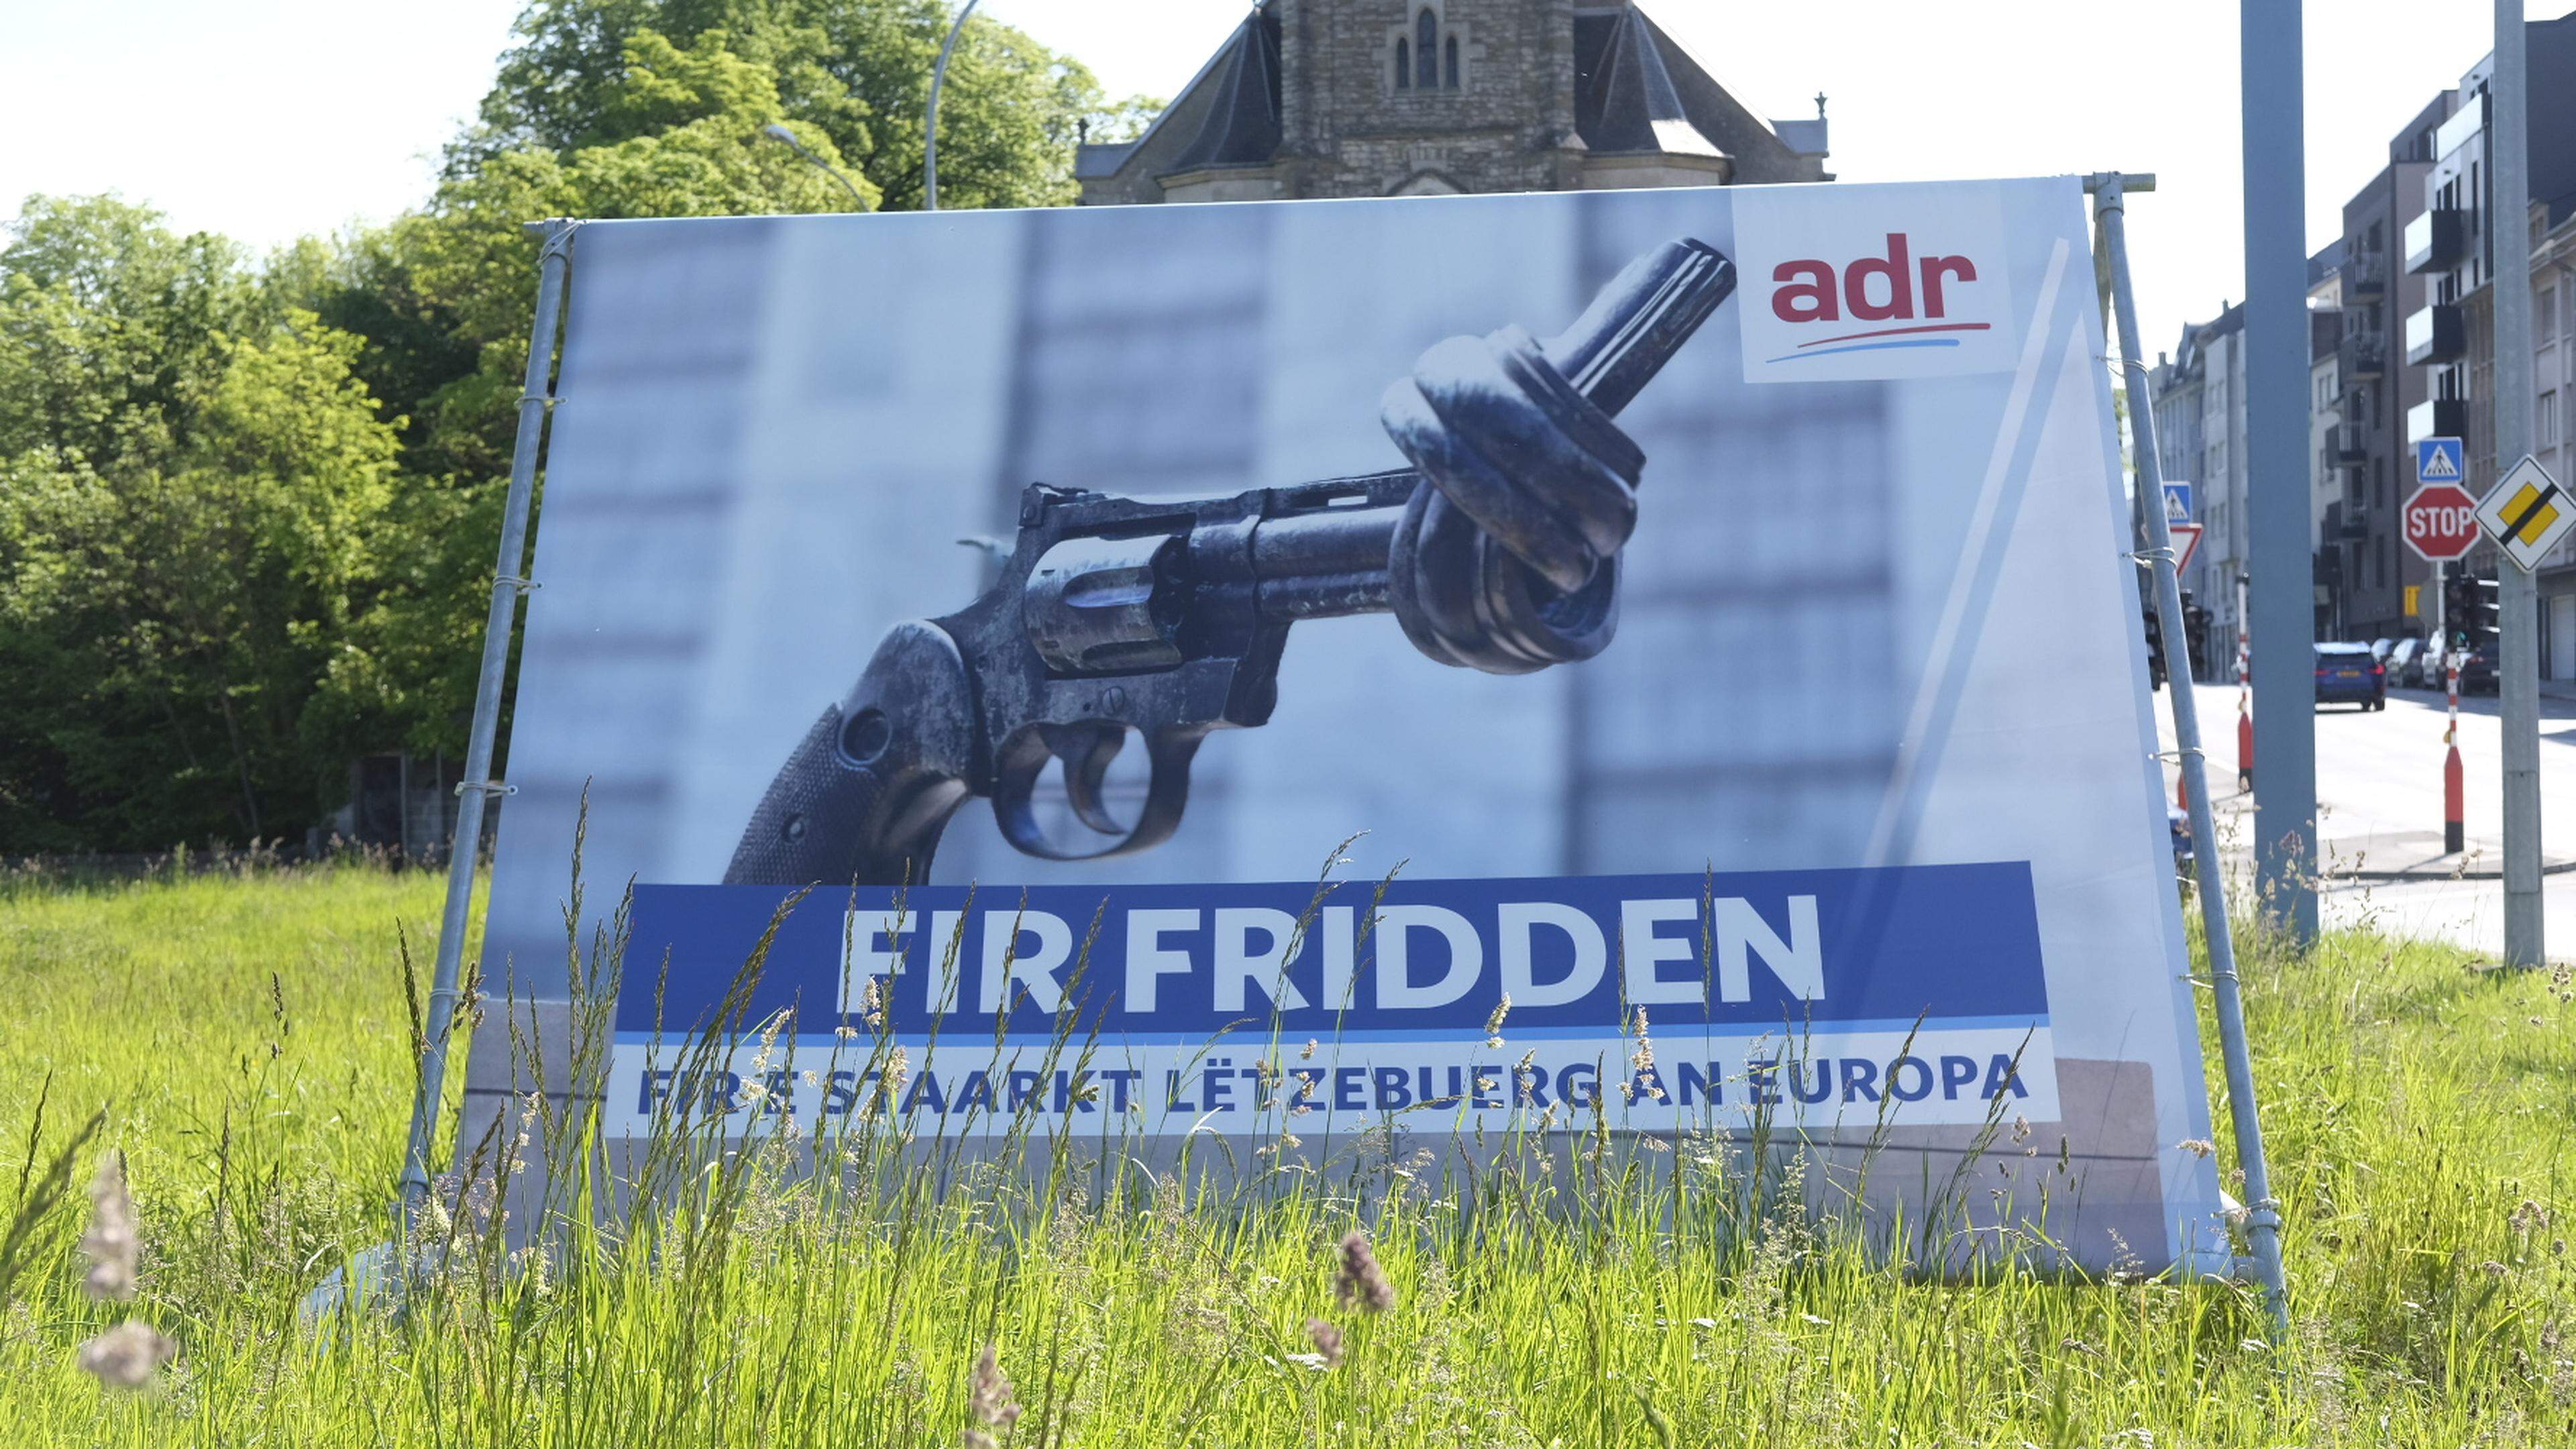 A Swiss peace foundation says it did not give the ADR permission to use a photo of the ‘Non Violence’ sculpture